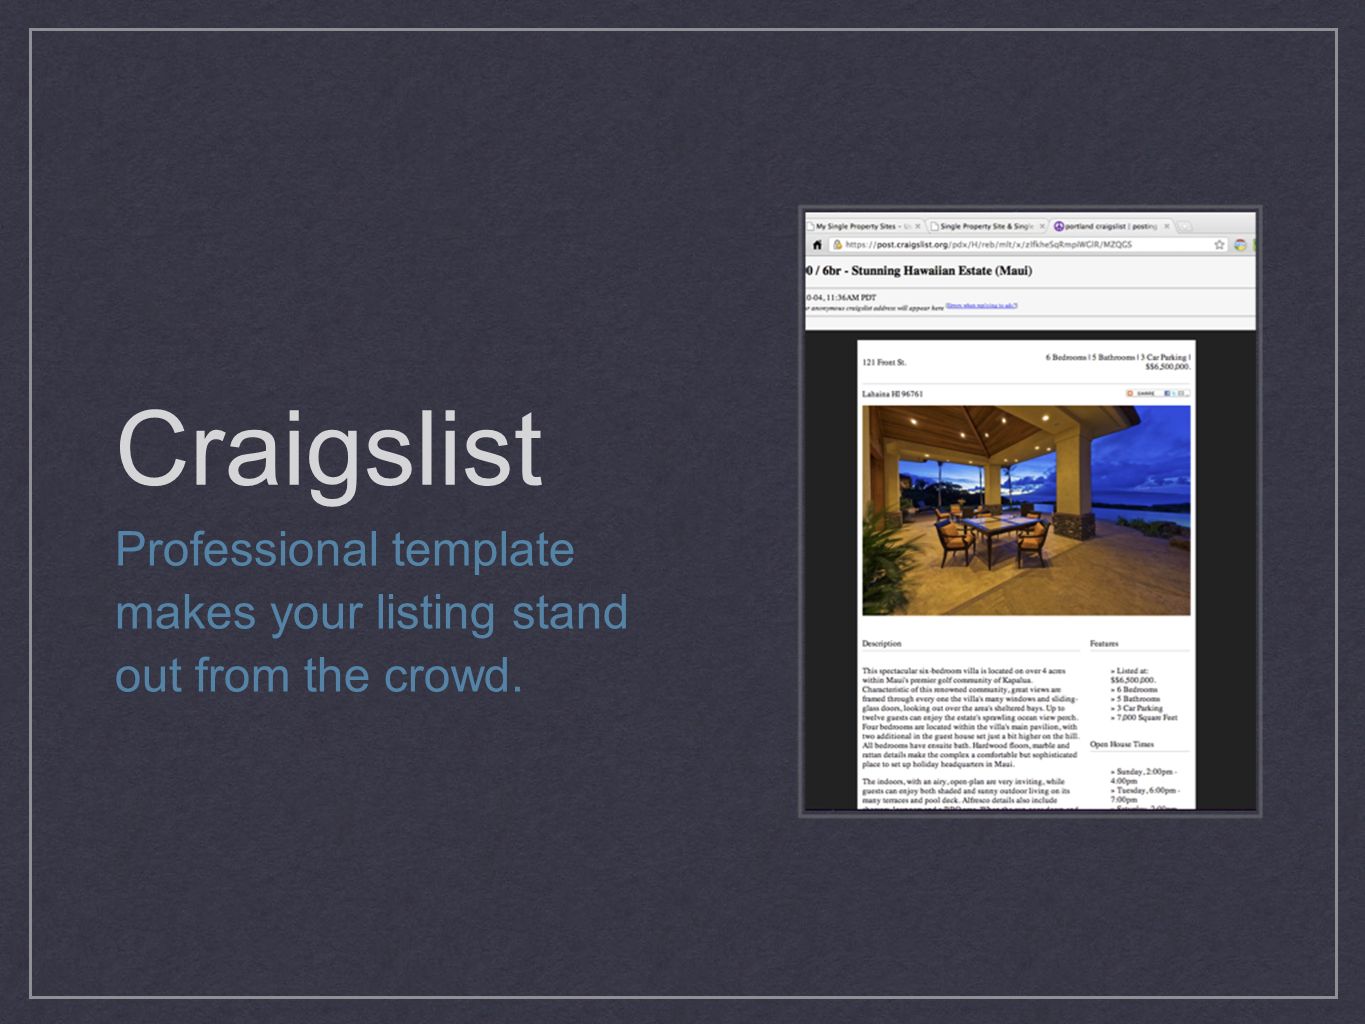 Craigslist Professional template makes your listing stand out from the crowd.